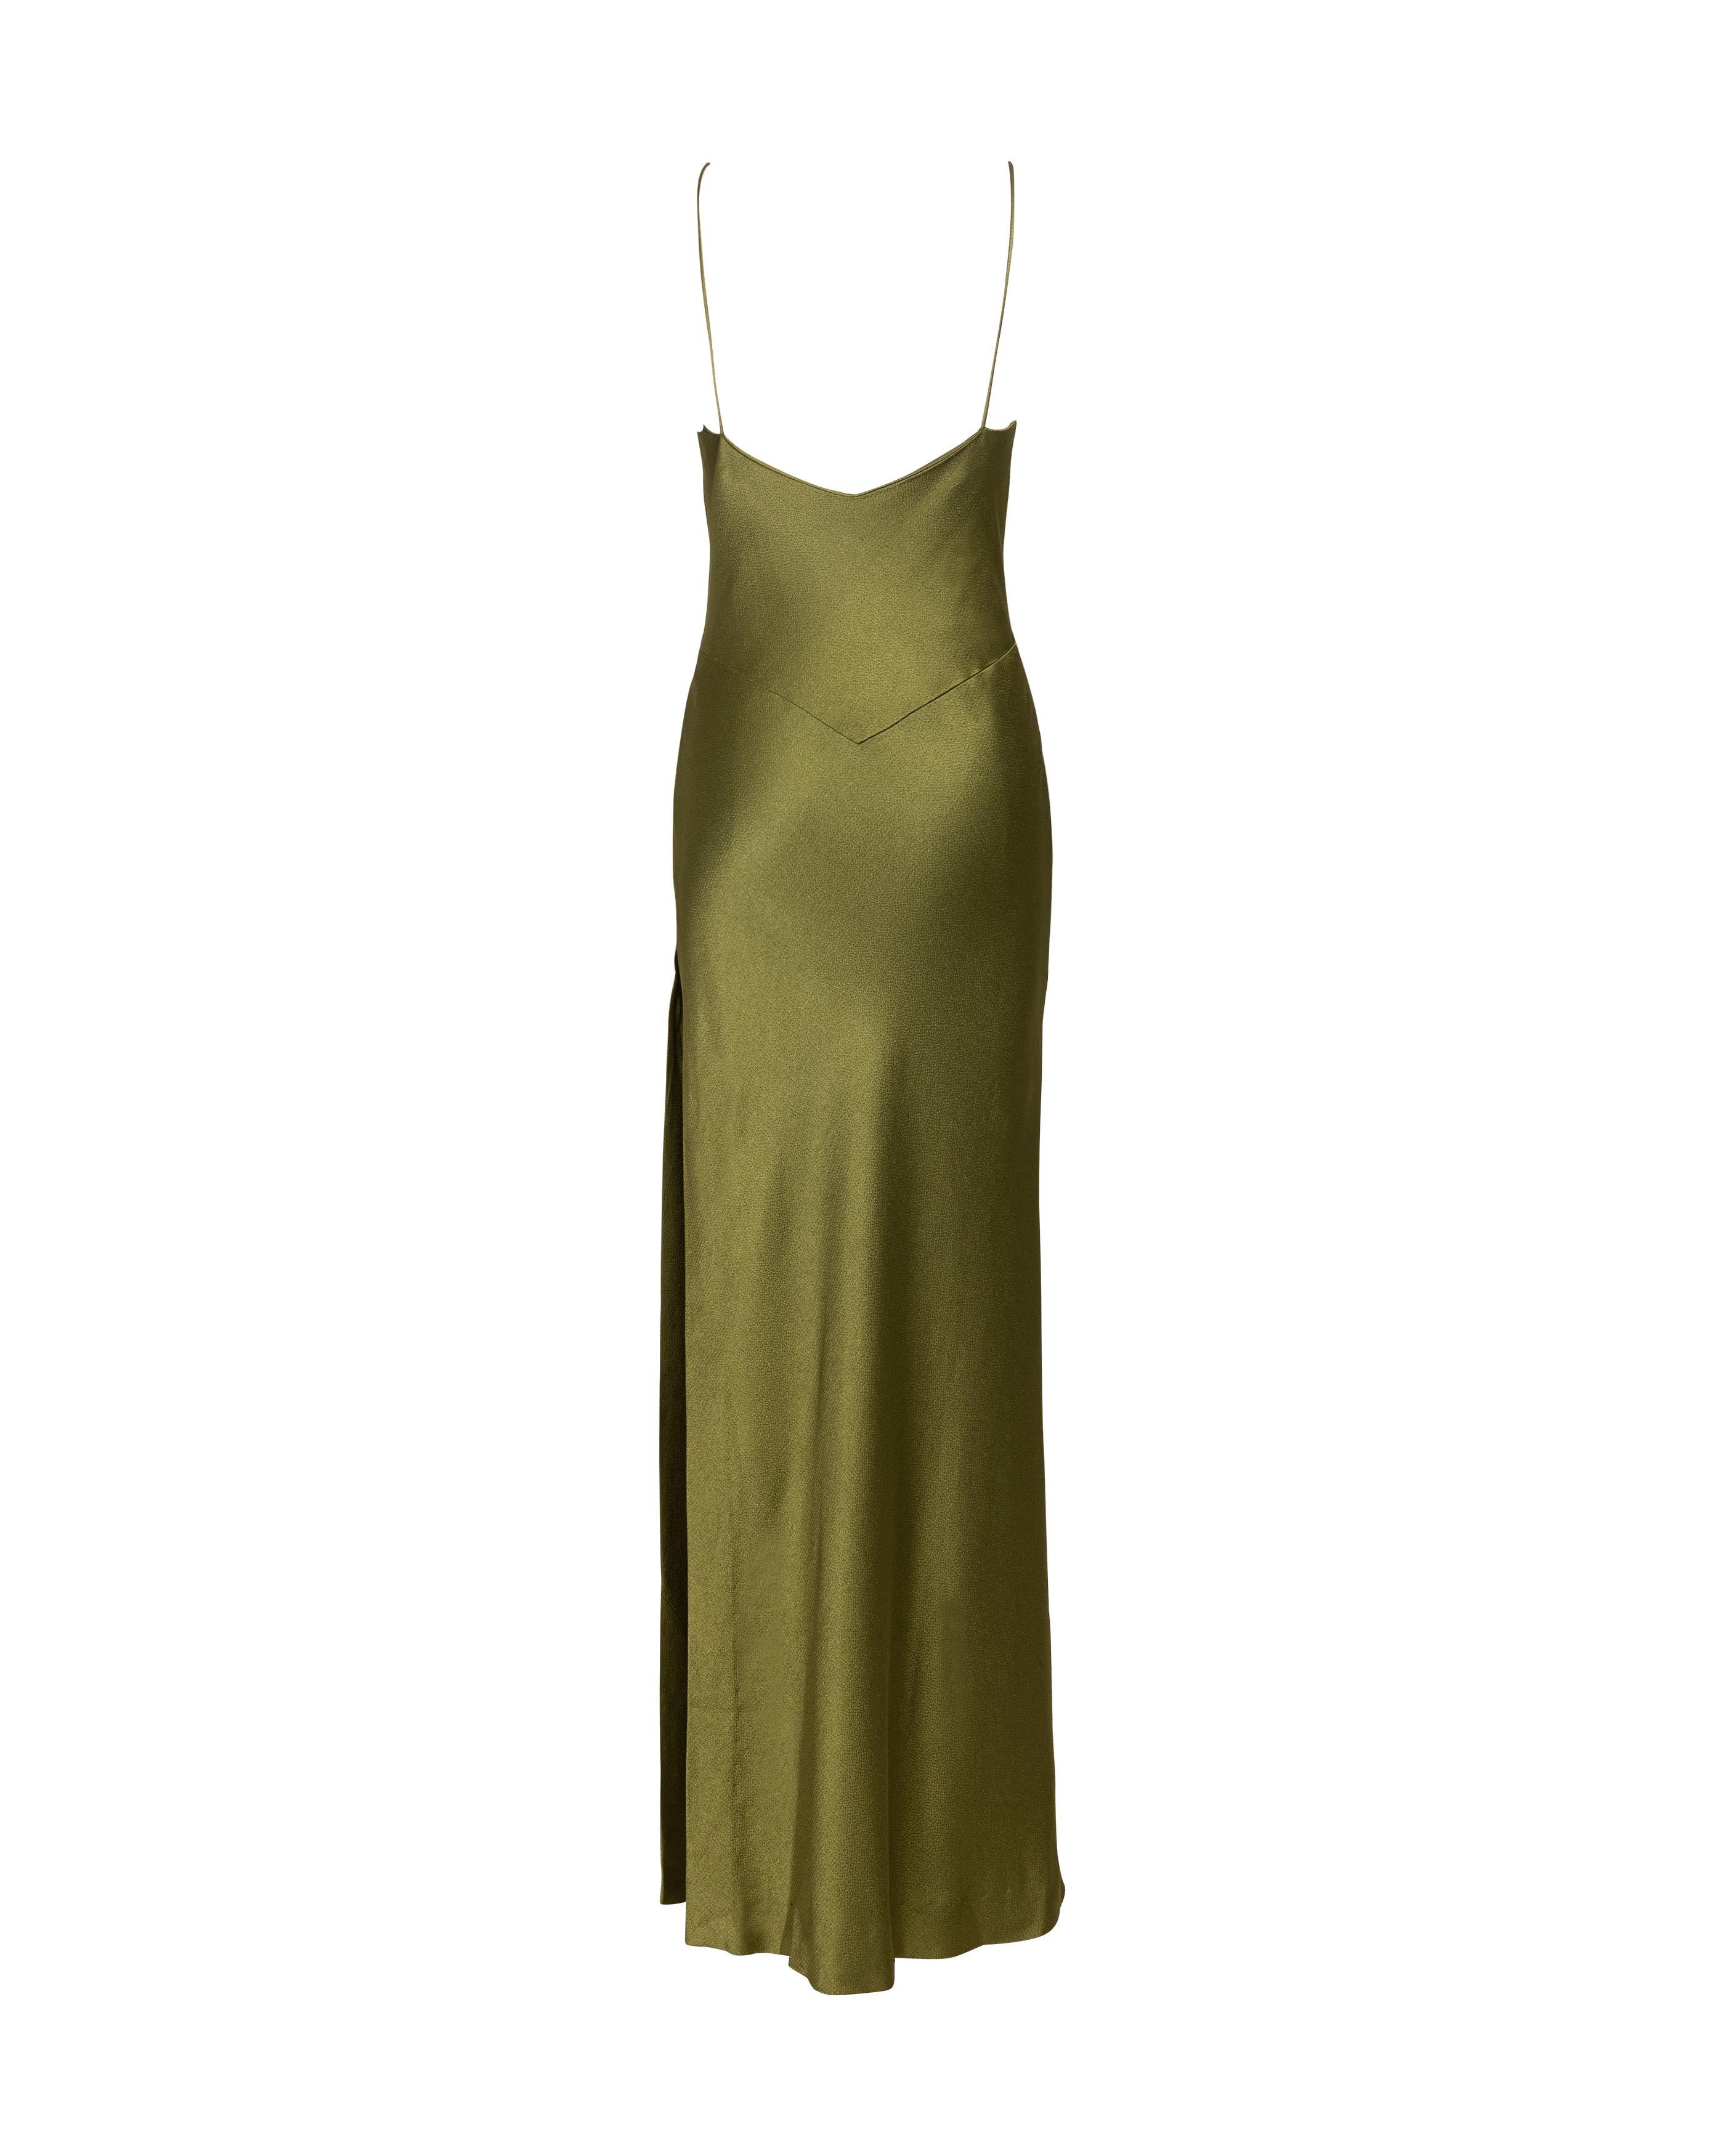 S/S 1999 Christian Dior by John Galliano Olive Green Bias Cut Slip Gown For Sale 2